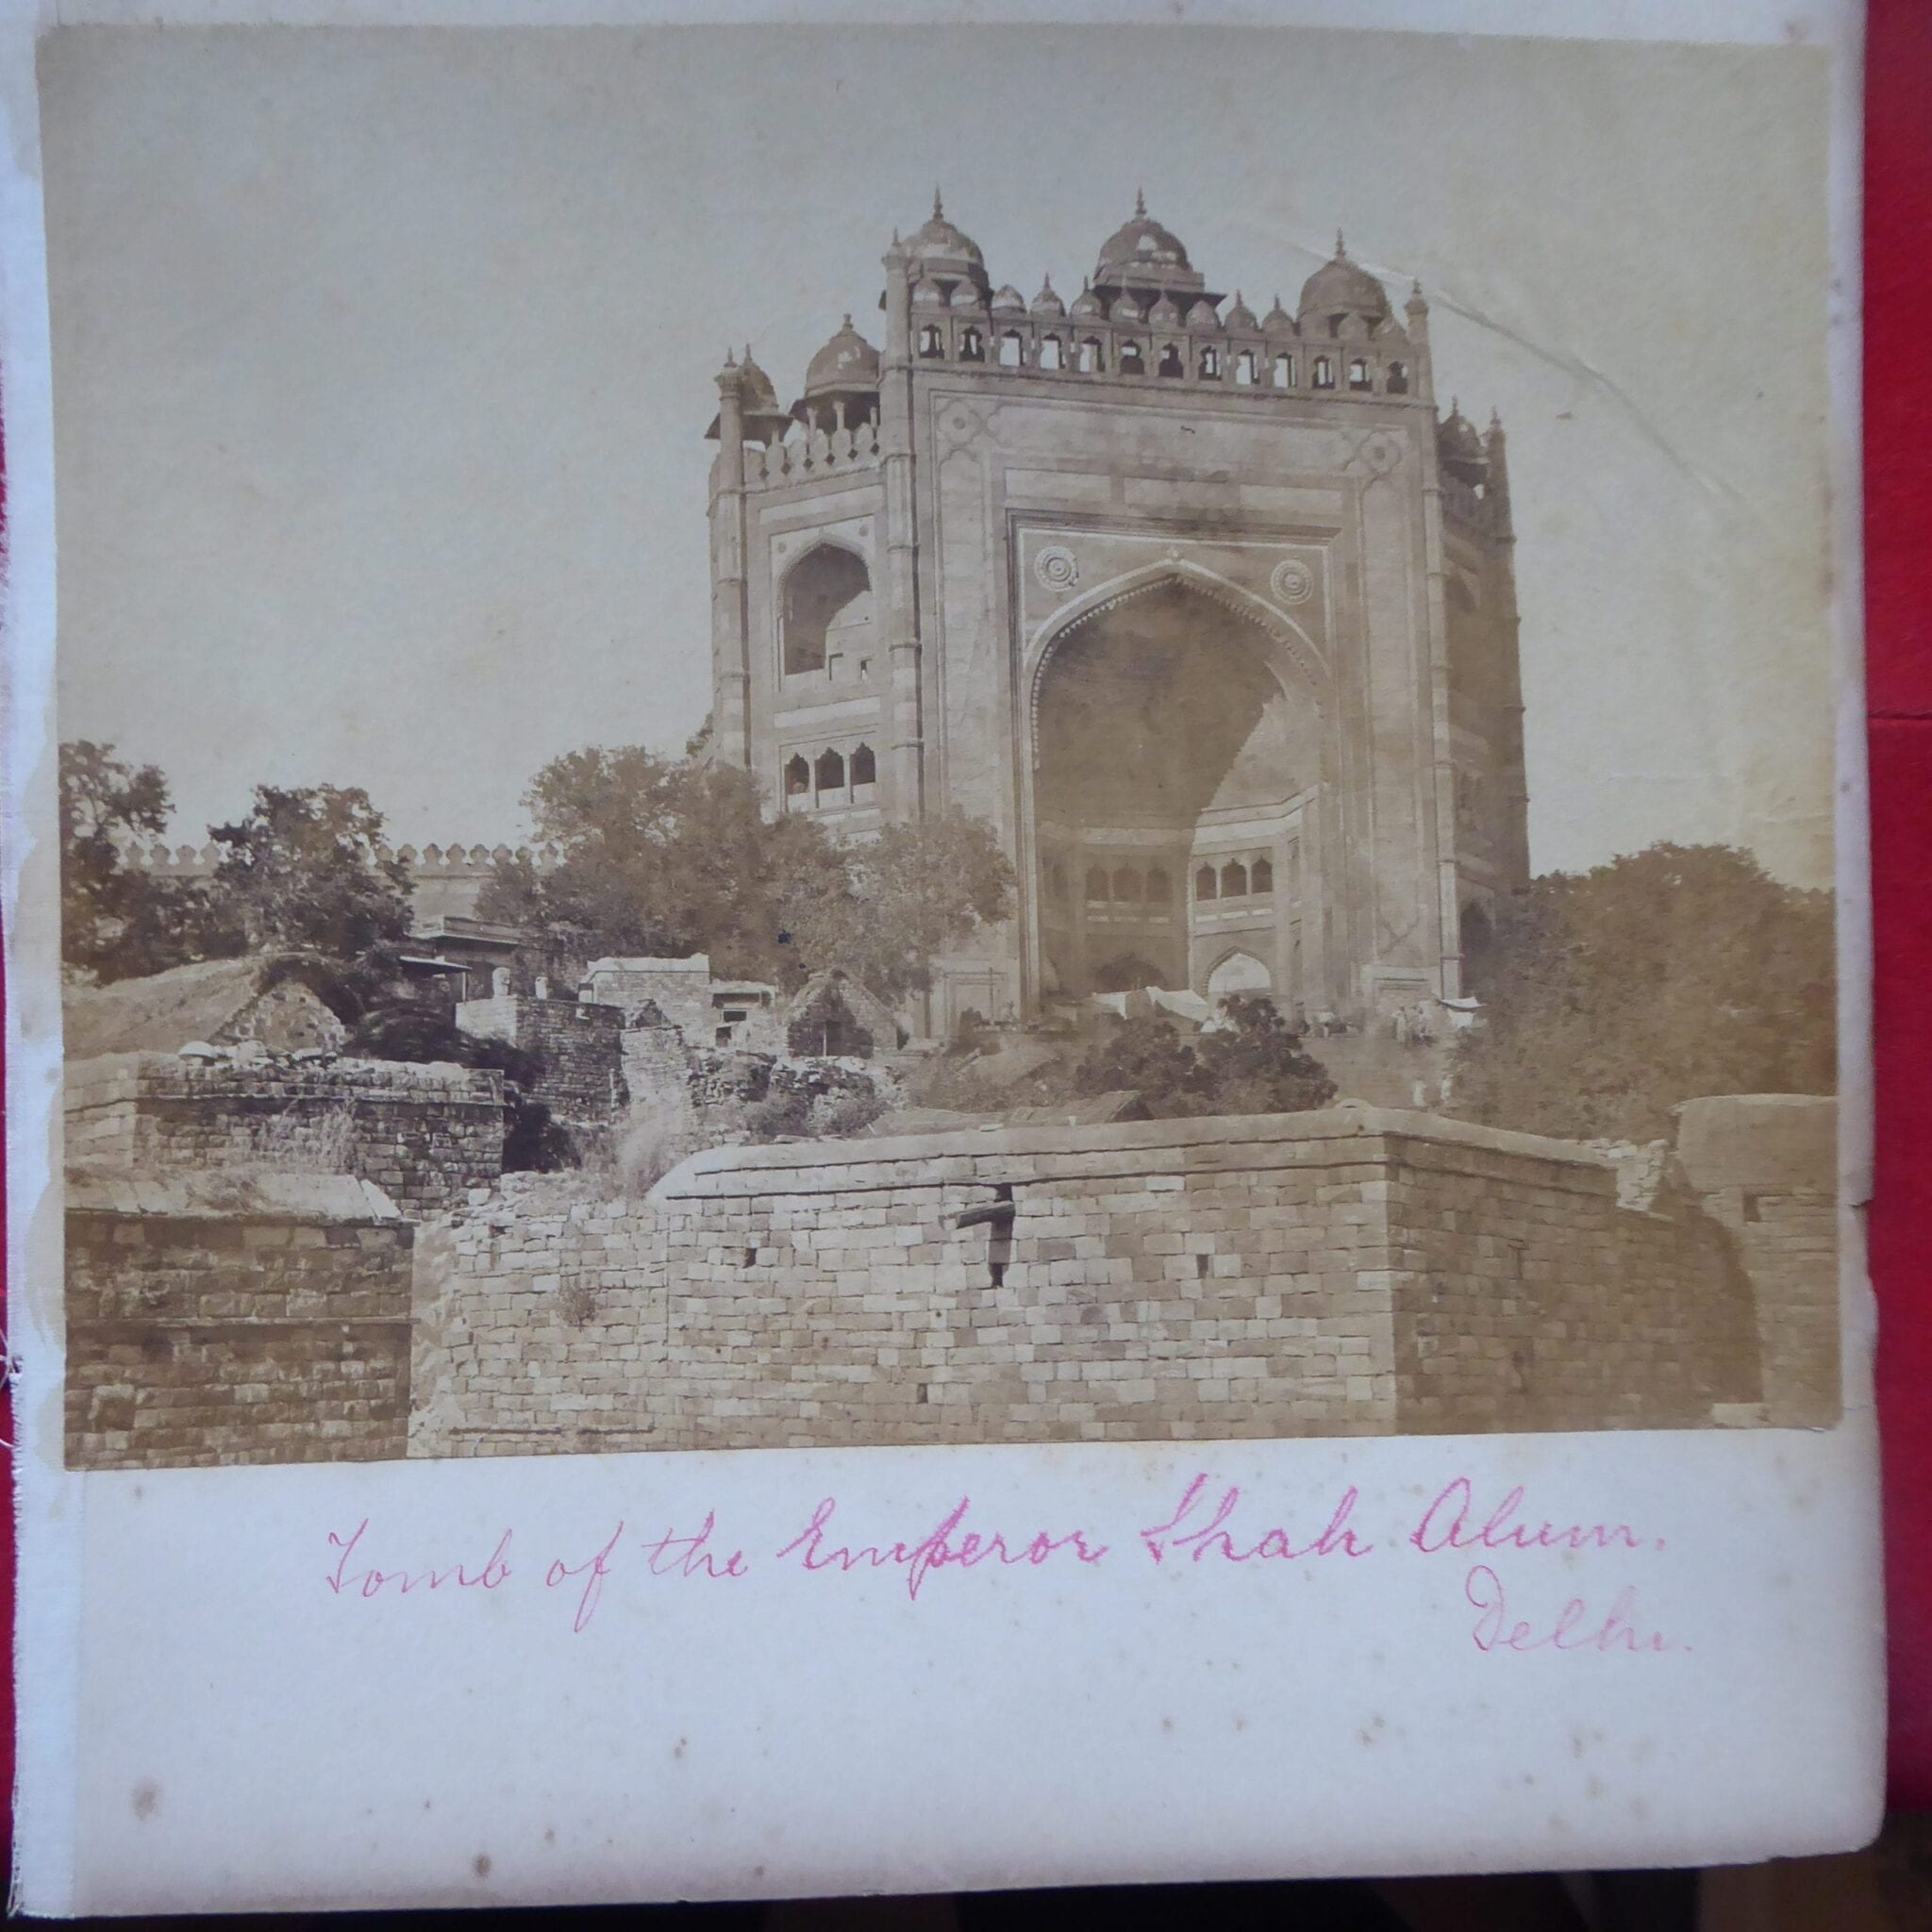 DELHI. The Tomb of the Emperor Shah Alam – Bates and Hindmarch